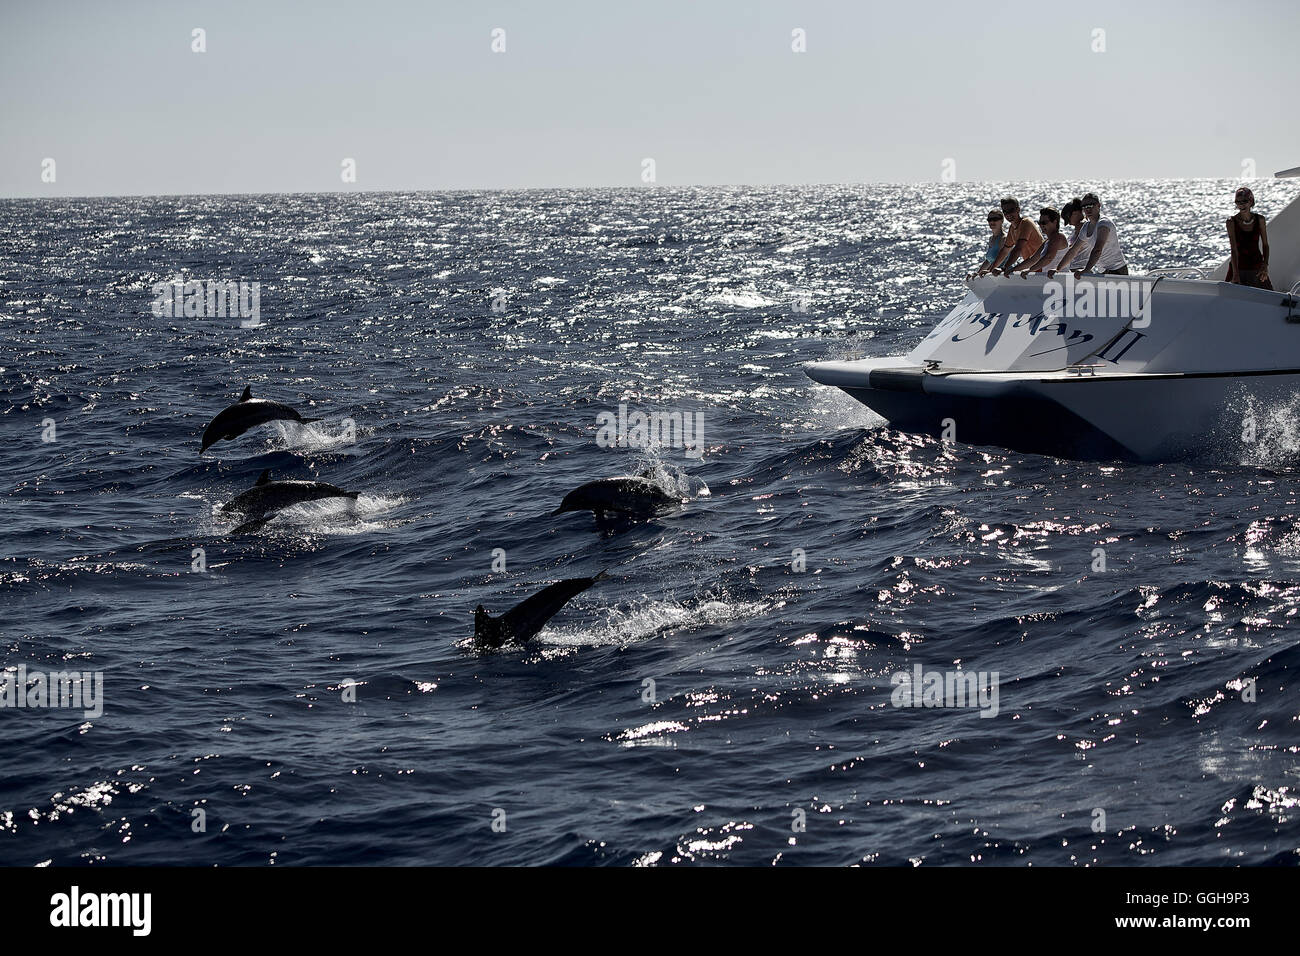 Persons on a boat watching swimming dolphins, Dominica, Lesser Antilles, Caribbean Stock Photo